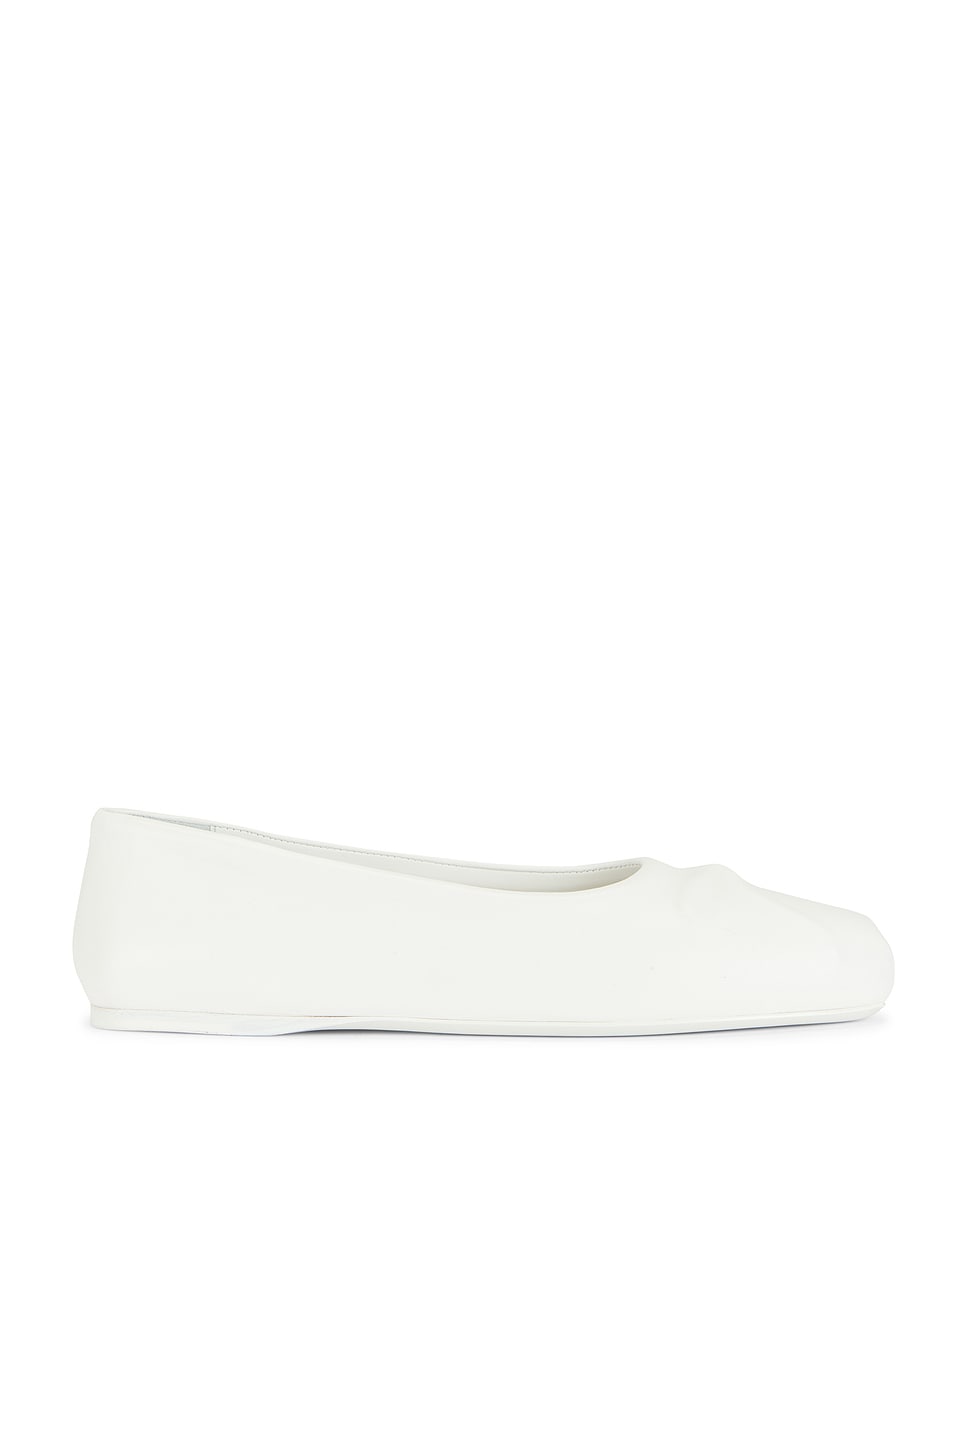 Image 1 of Marni Ballet Flat in Lily White